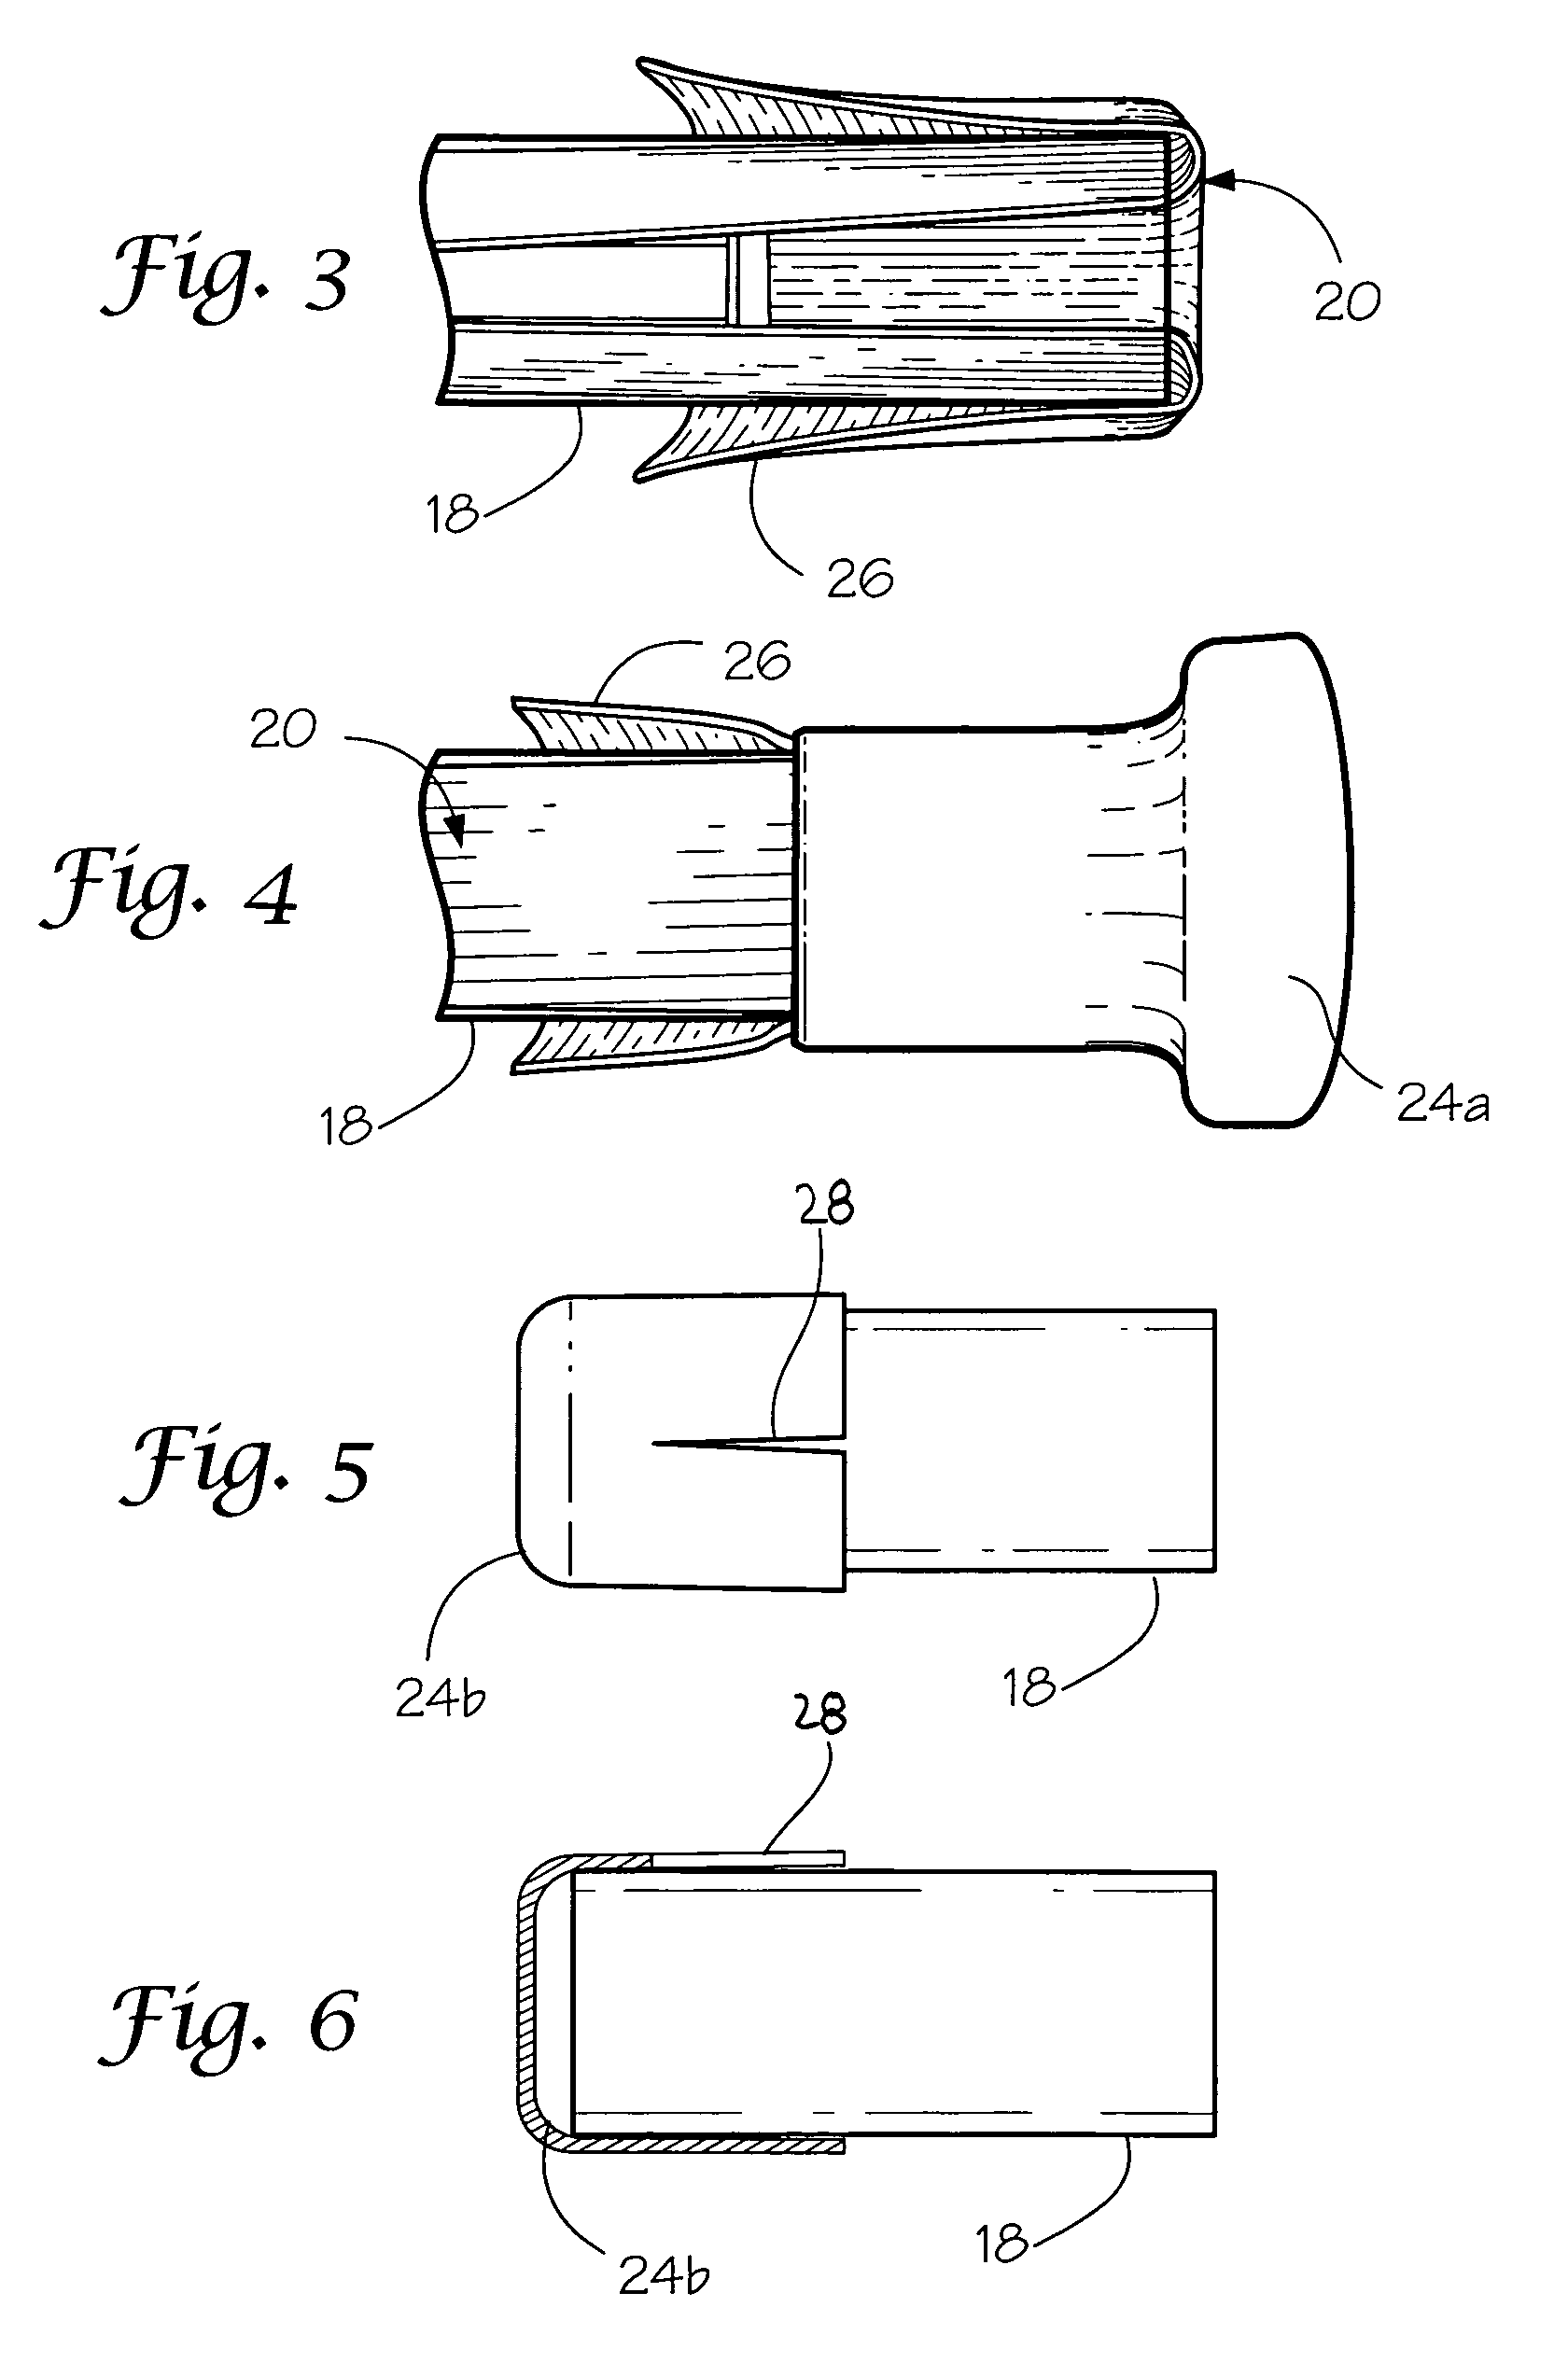 Crush resistant needle packaging assembly having rapid needle access